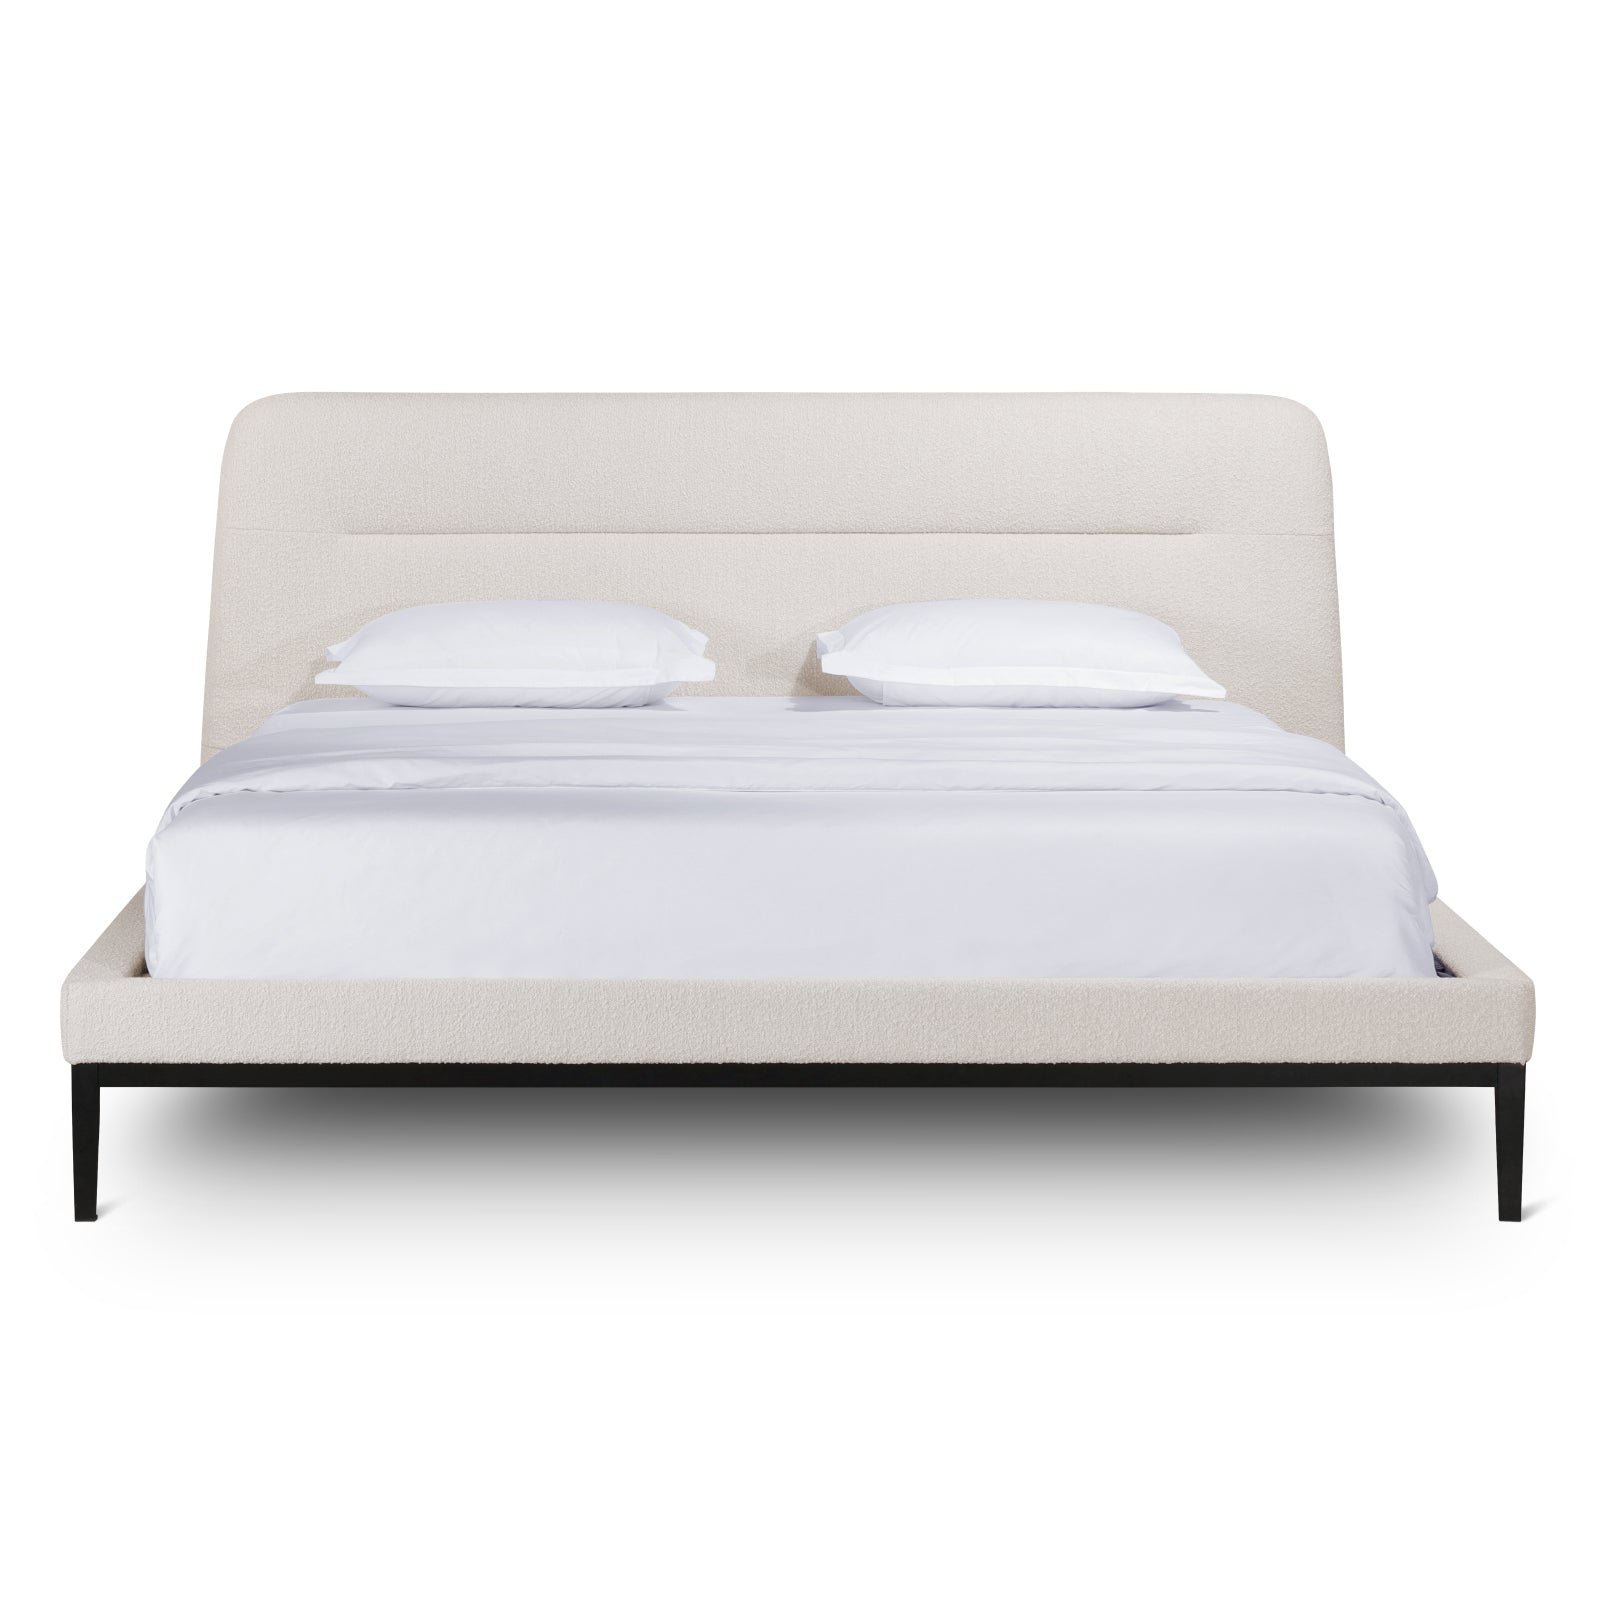 Lean On Me Bed, King, Cream Boucle - Image 9